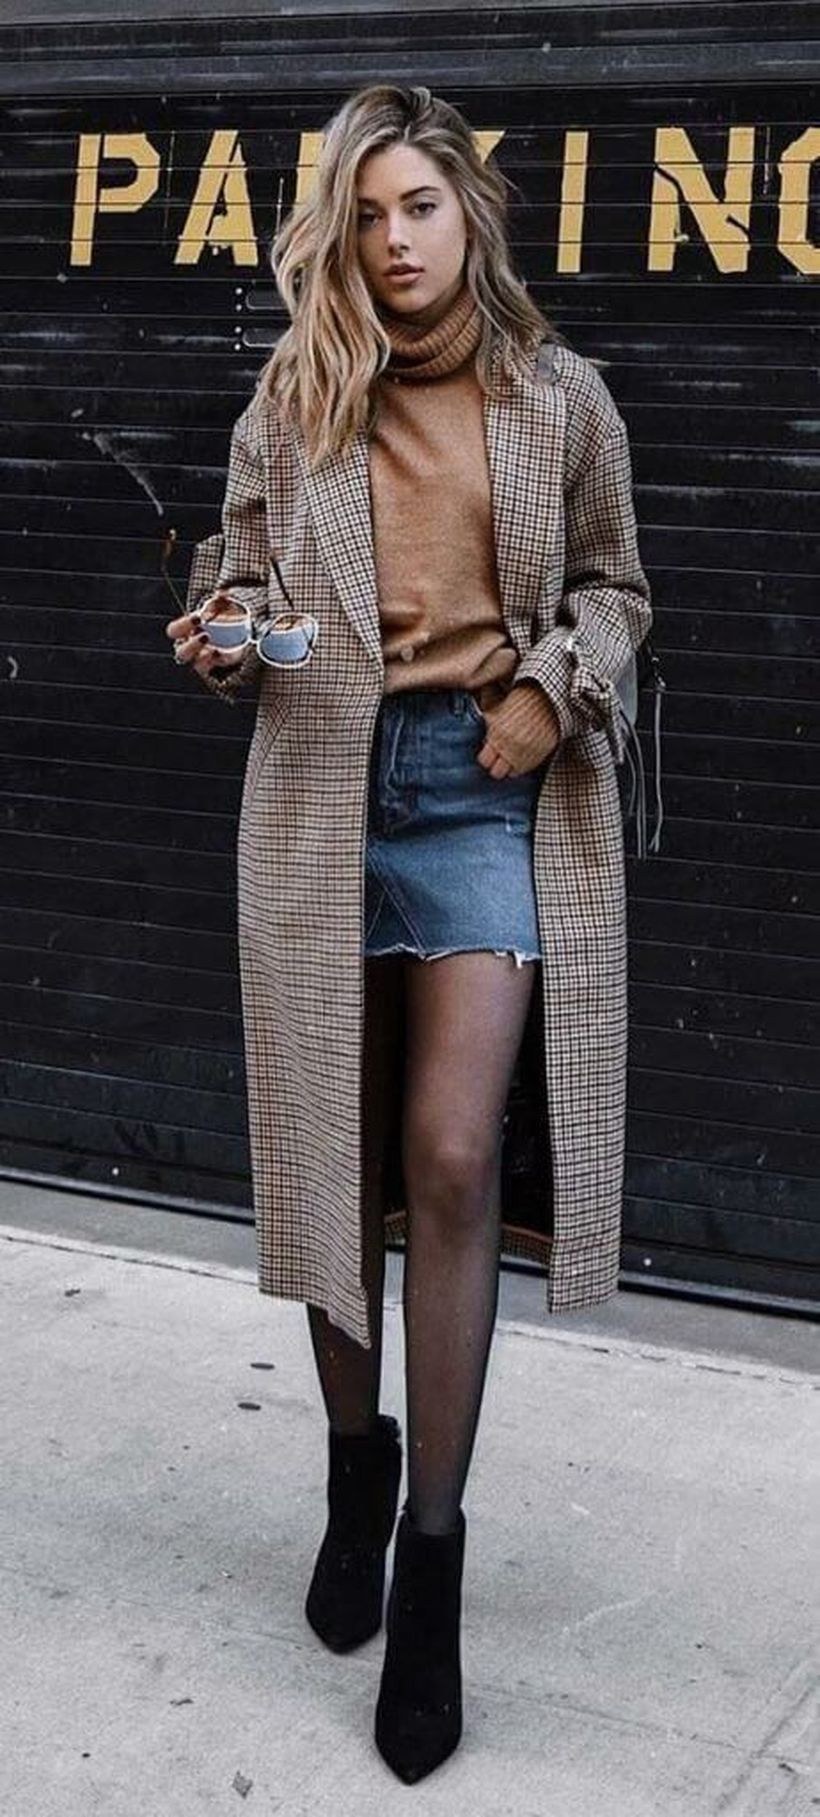 32 Charming Fall Street Style Outfits Inspiration to Make You Look Cool this Season